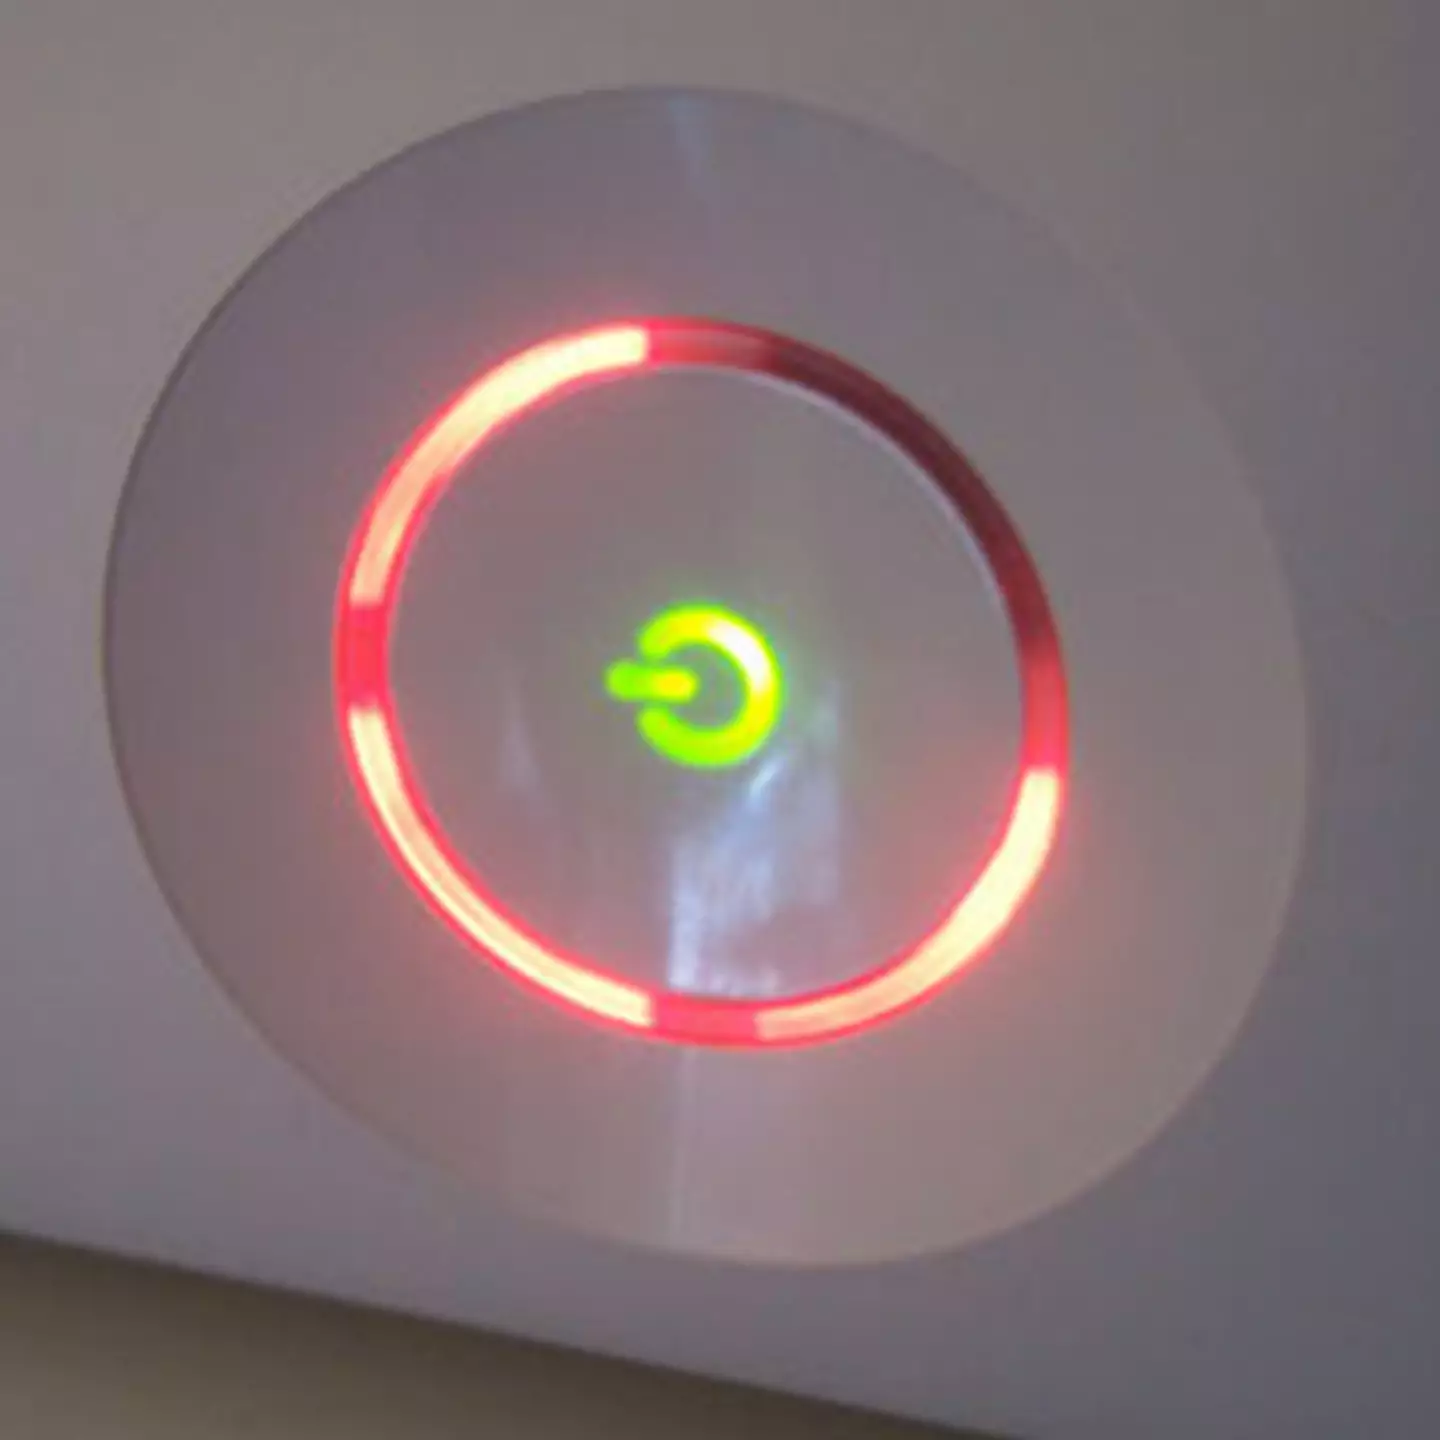 Microsoft has finally explained what caused Xbox 360's red ring of death